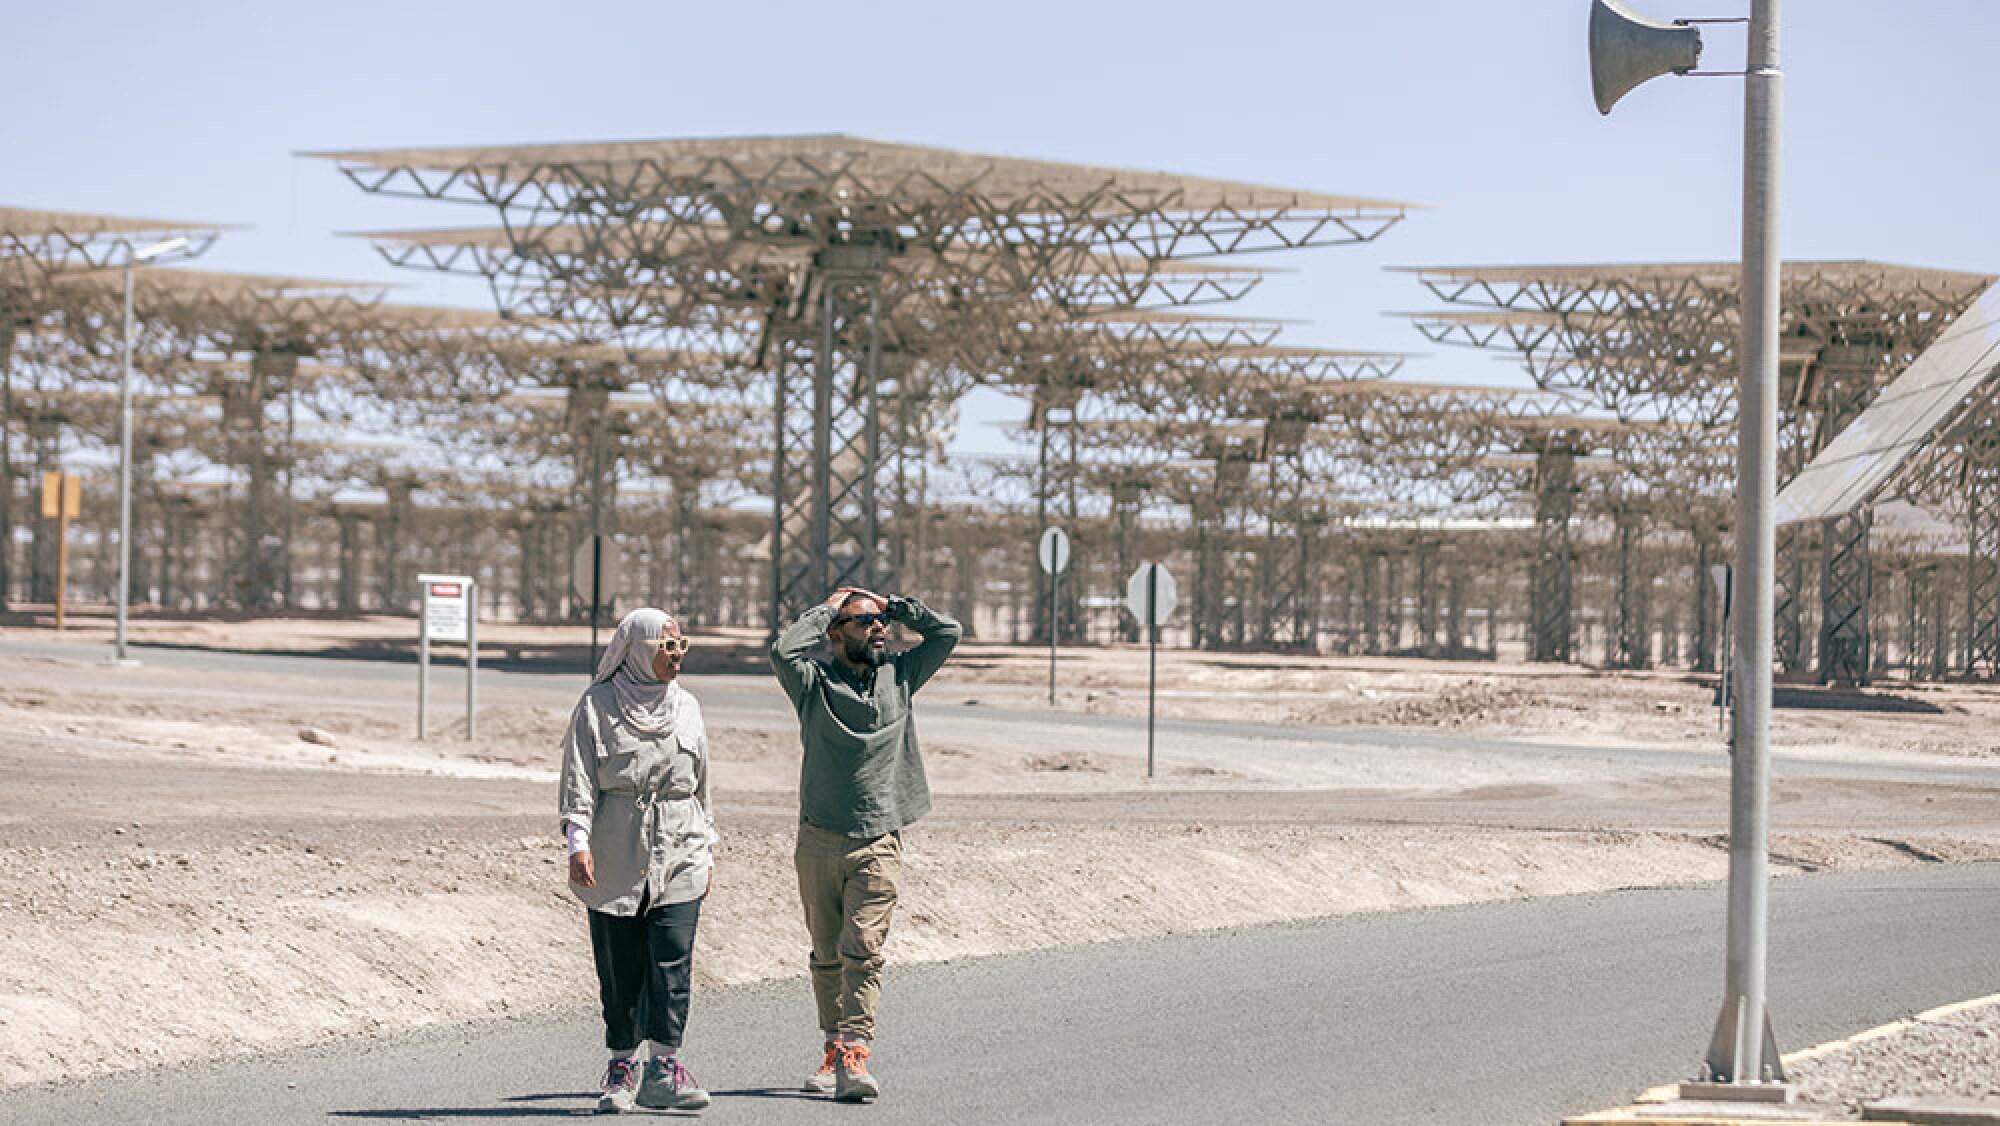 A man and woman walk through the desert with metal structures in the background.